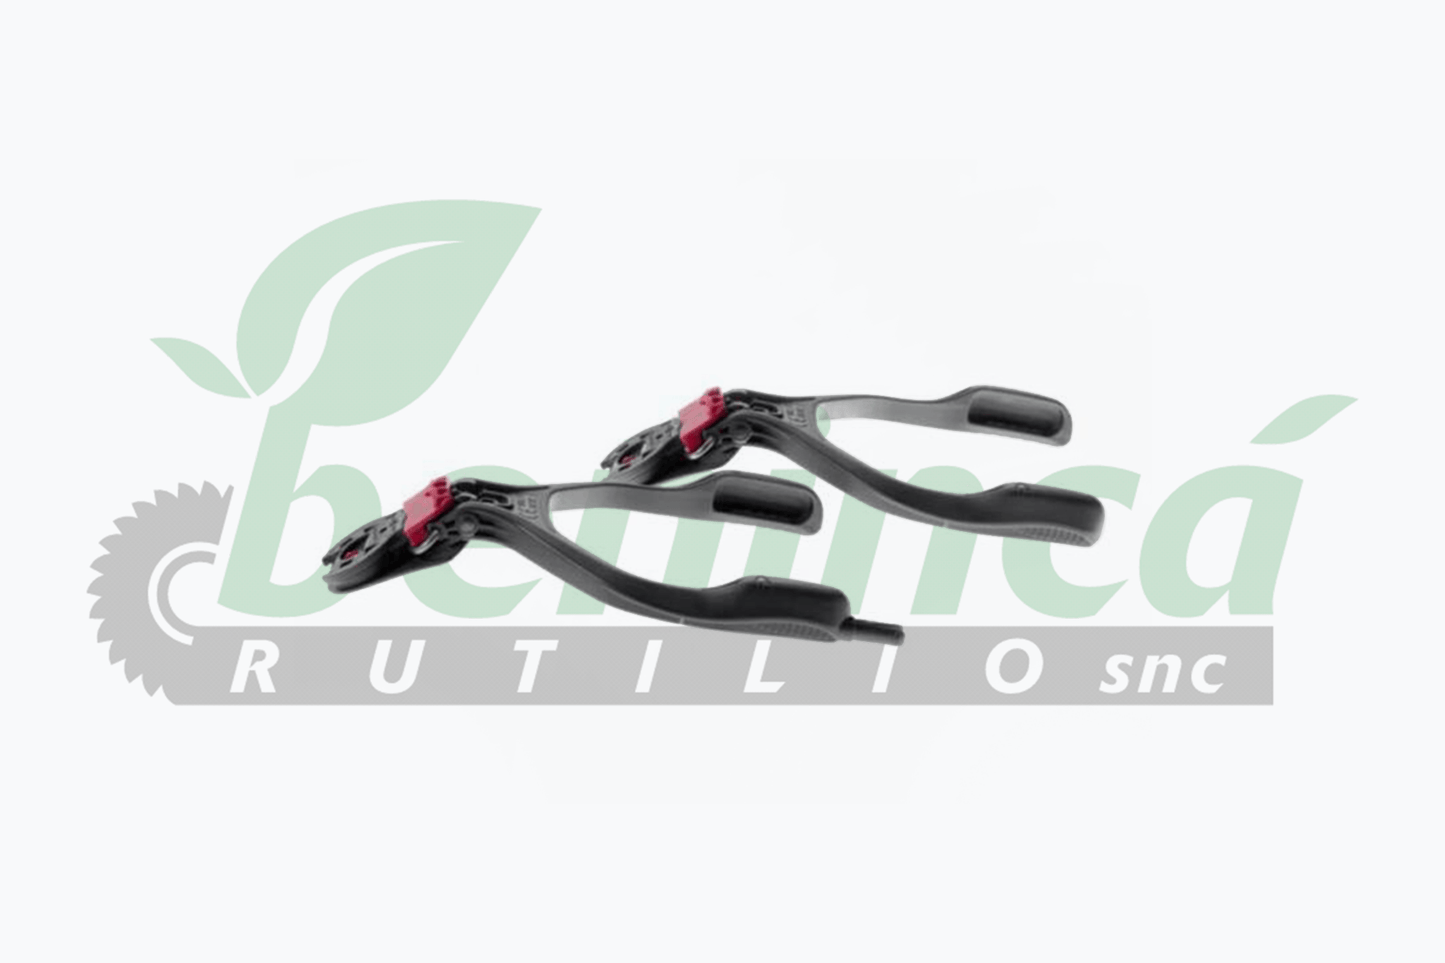 Protos headset support